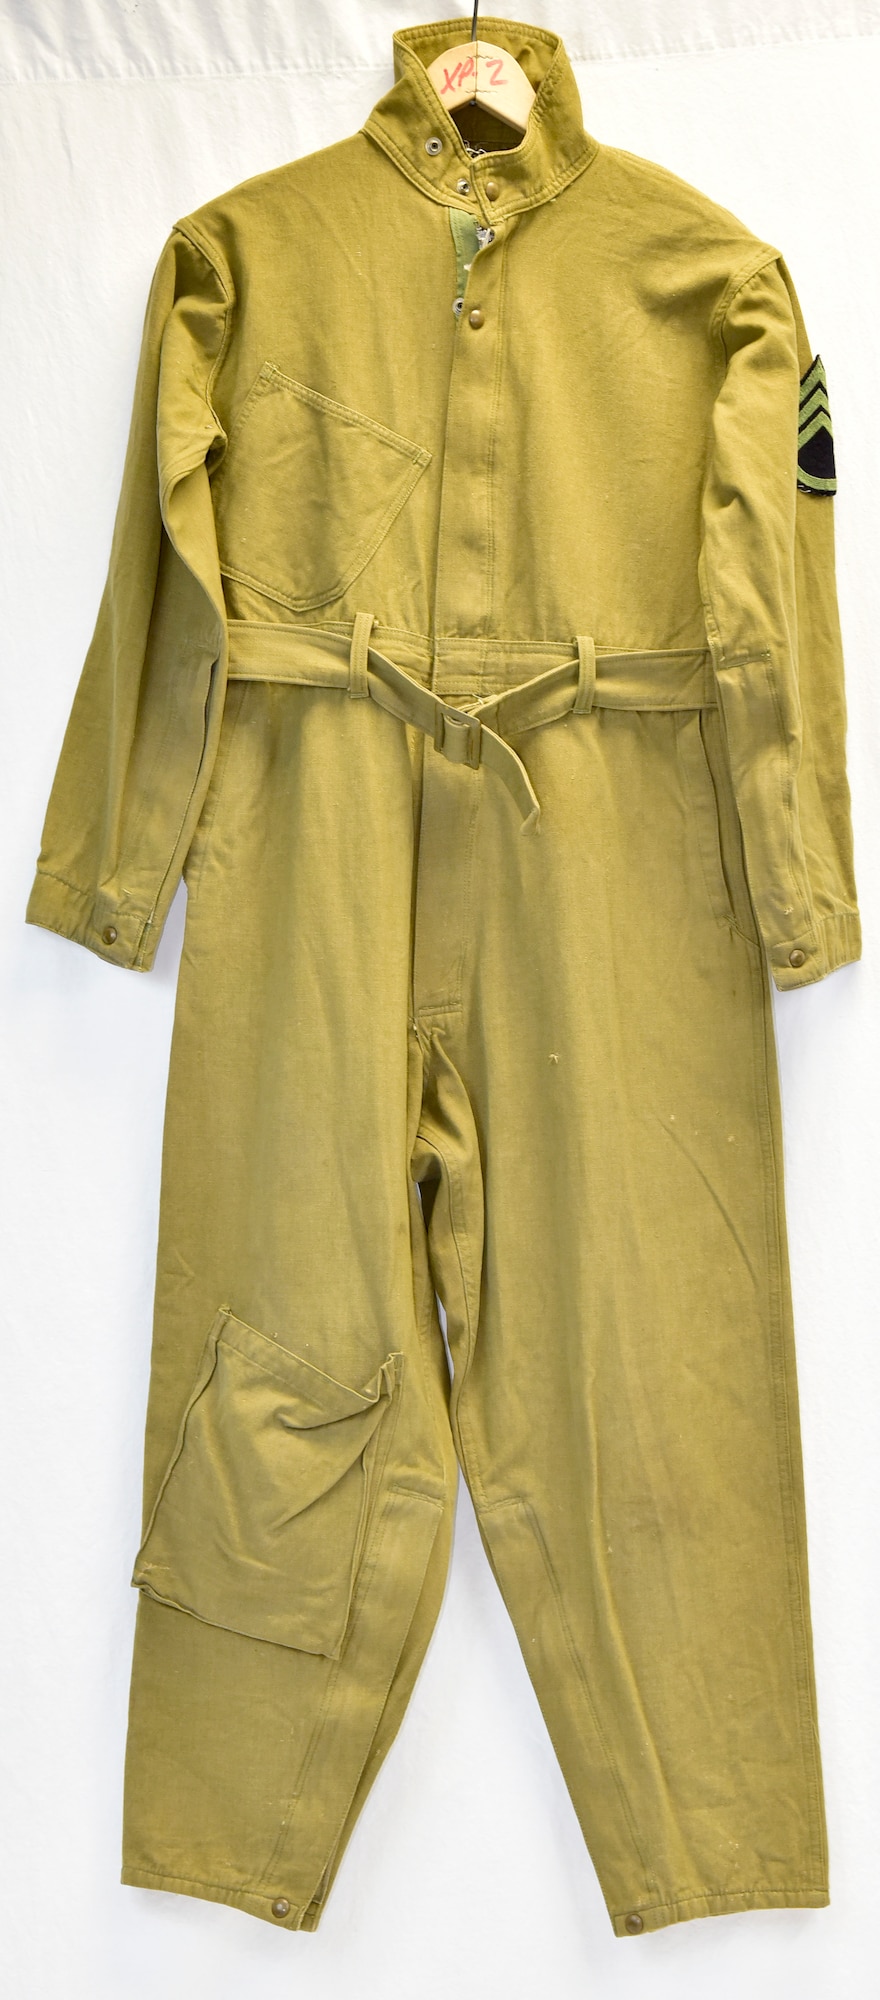 Plans call for this artifact to be displayed near the B-17F Memphis Belle™ as part of the new strategic bombardment exhibit in the WWII Gallery, which opens to the public on May 17, 2018. Flight suit worn by Memphis Belle waist gunner SSgt William “Bill” Winchell. Winchell was credited with downing an Fw 190 fighter.